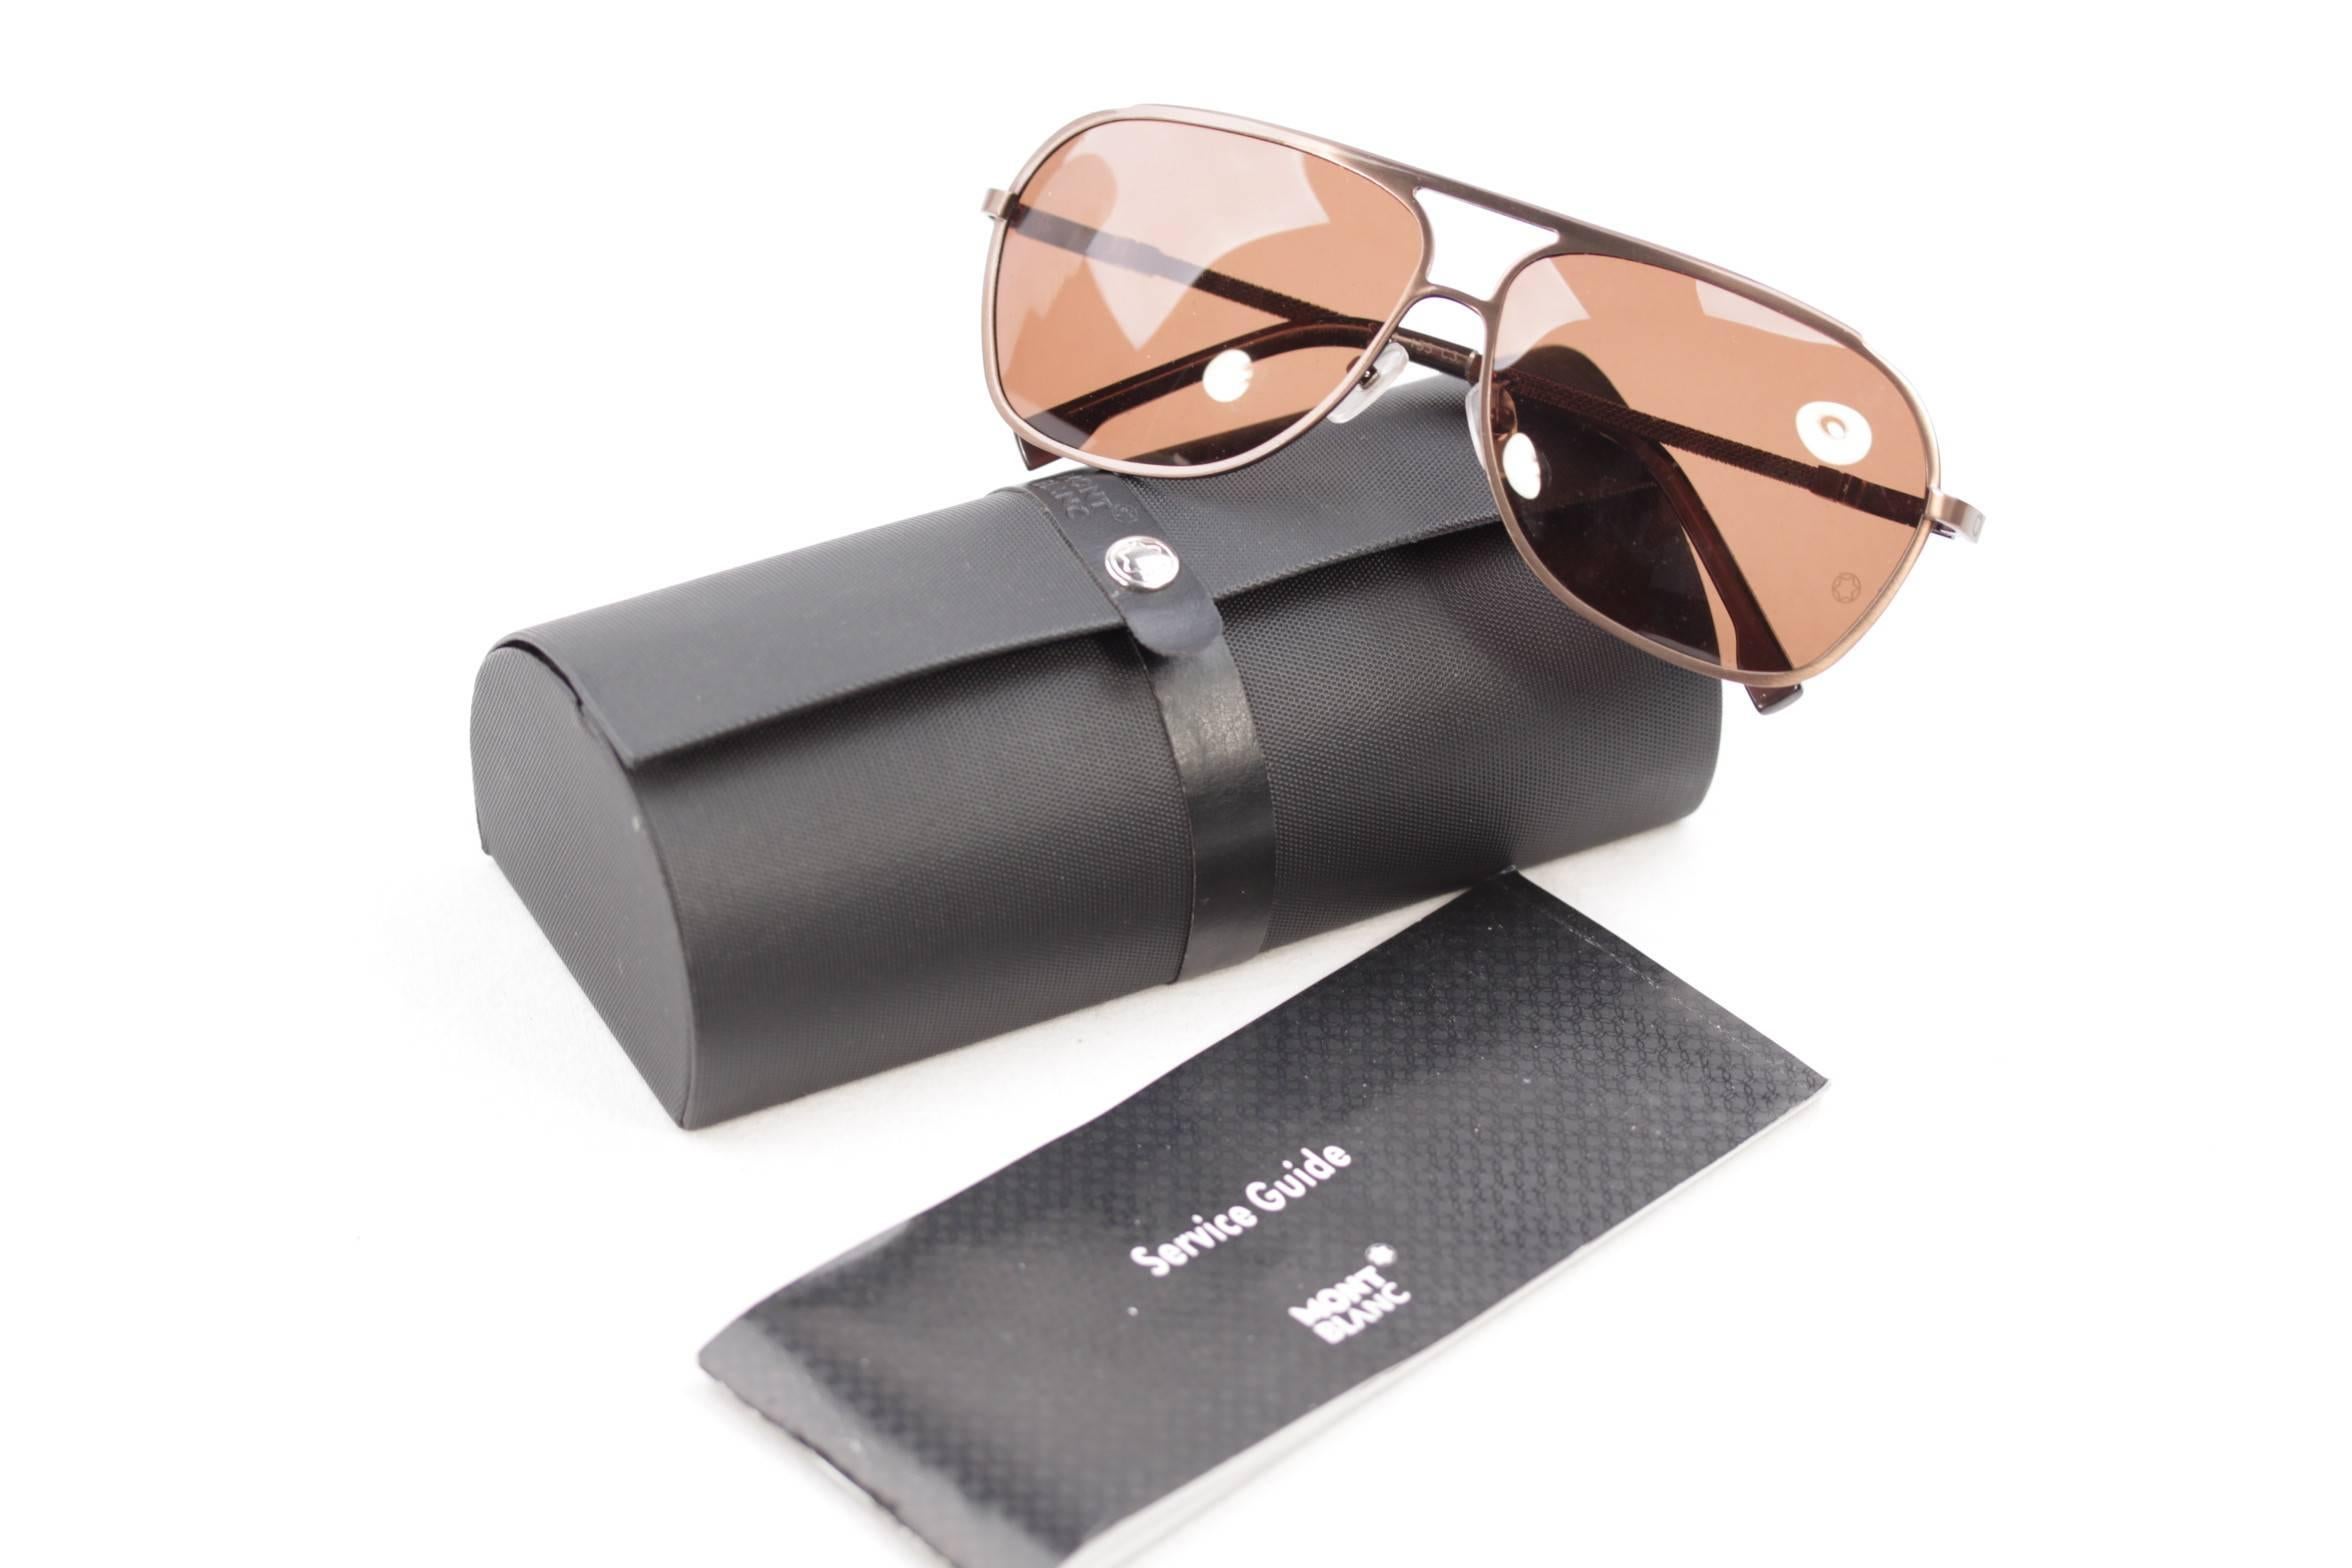 - Men sunglasses, signed MONTBLANC(Made in Italy)

- Brown polycarbonate lenses (original lenses w/ MONTBLANC logo)

- Brown metal frame

- MONTBLANC signatures on temples

- They will come with its original MONTBLANC case

Style name